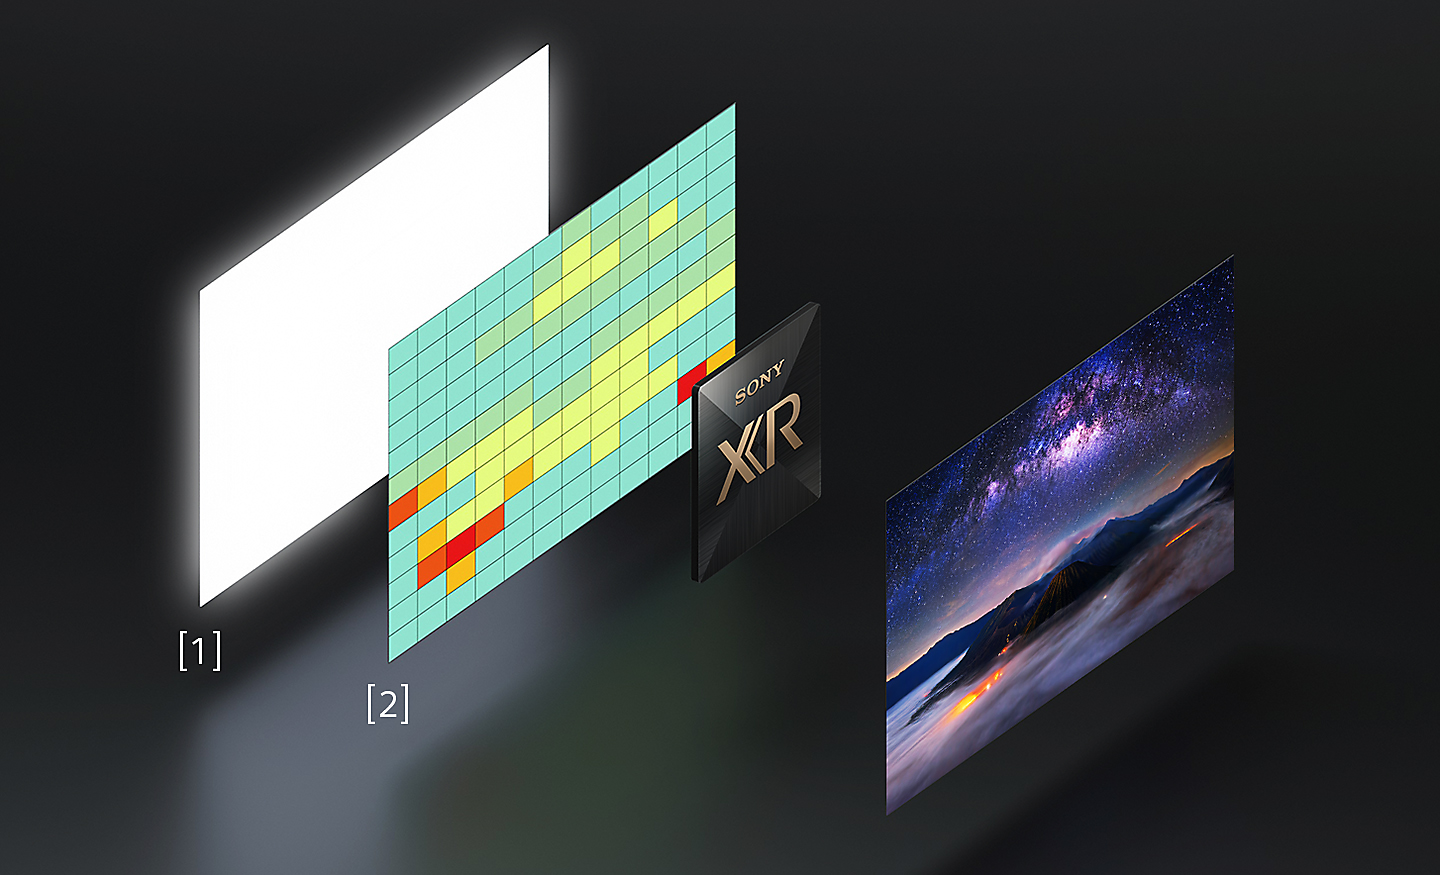 Graphic showing angled images of the high-luminance panel and temperature distribution mapping on the left, and an angled image of a BRAVIA screen full of colour on the right